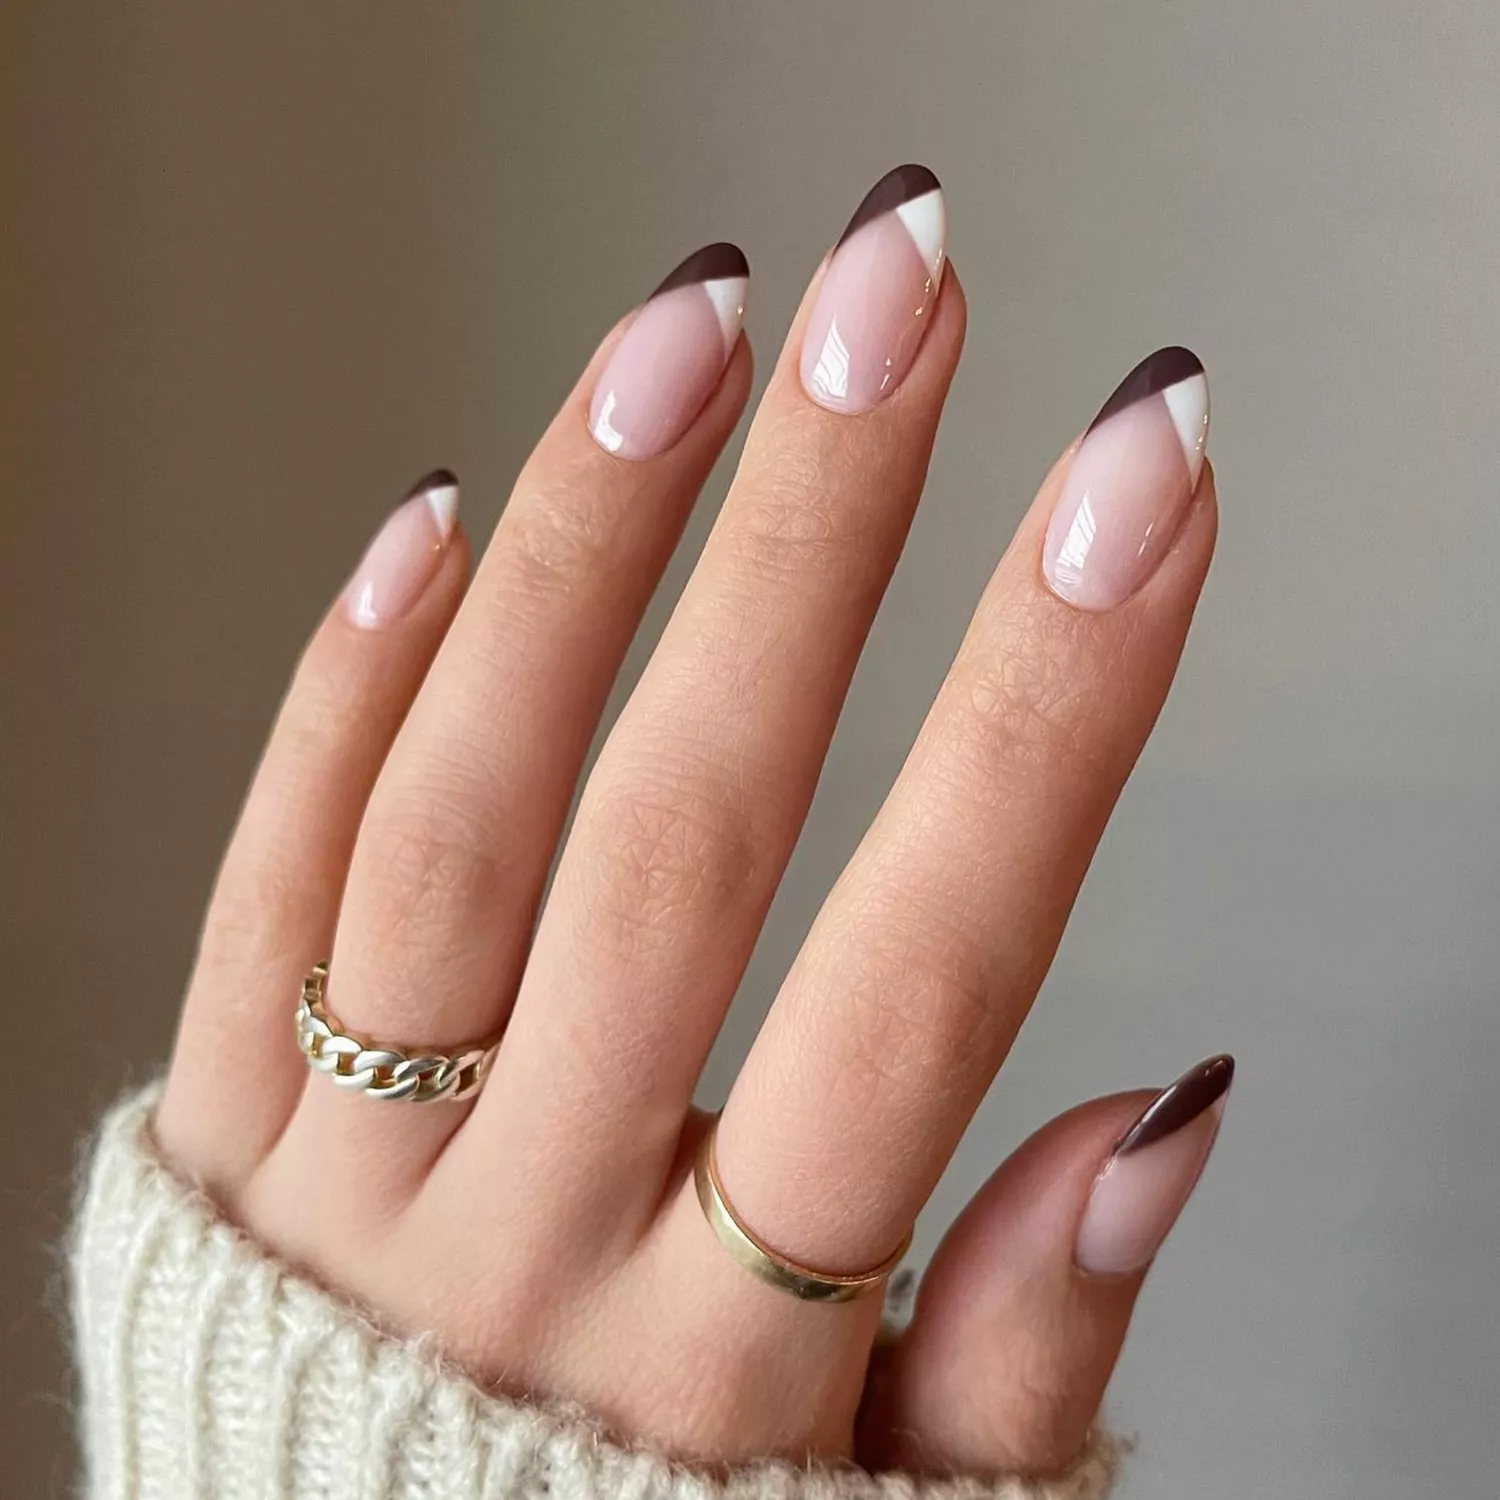 Nail Design Ideas: Criss-Cross French(@heluviee / Instagram)